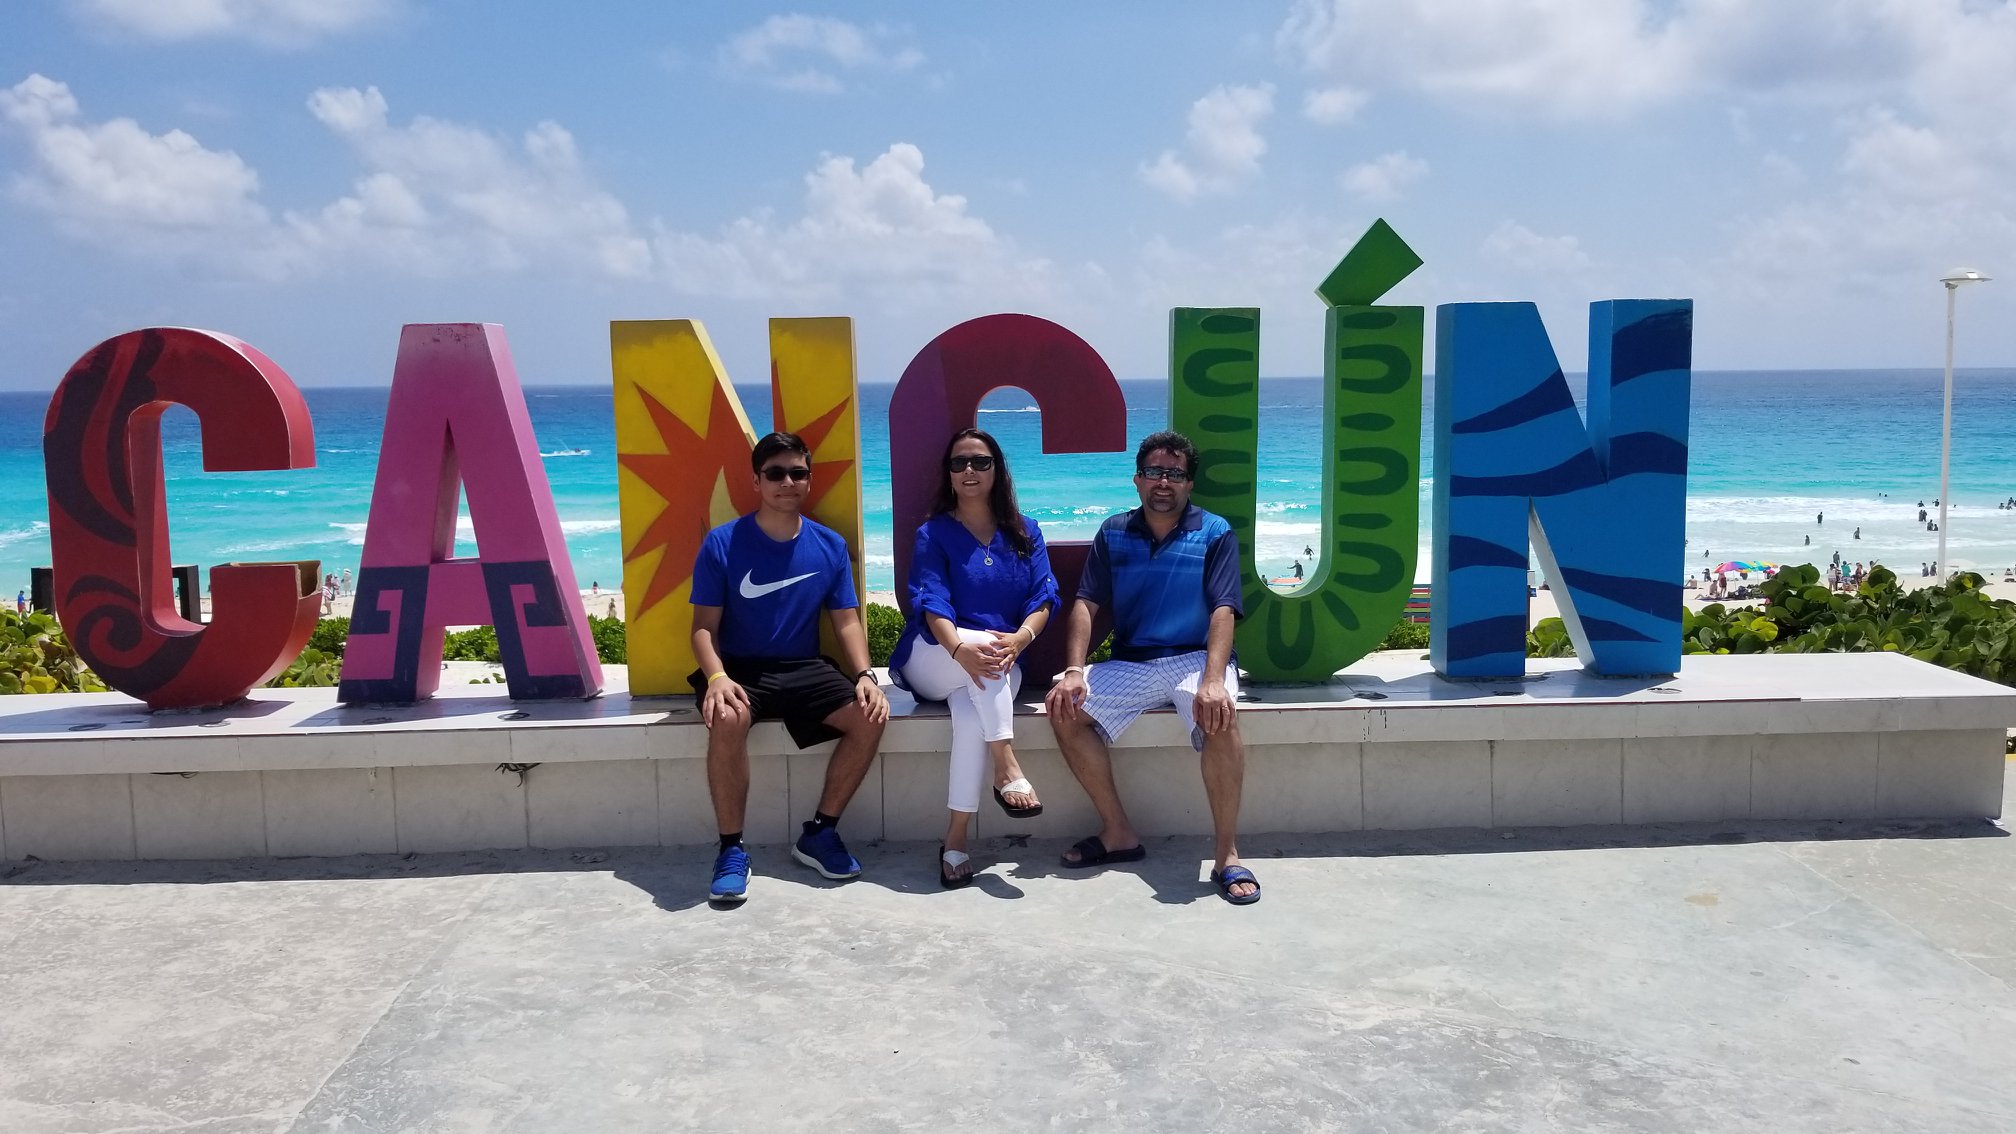 My Family in Cancun, Mexico